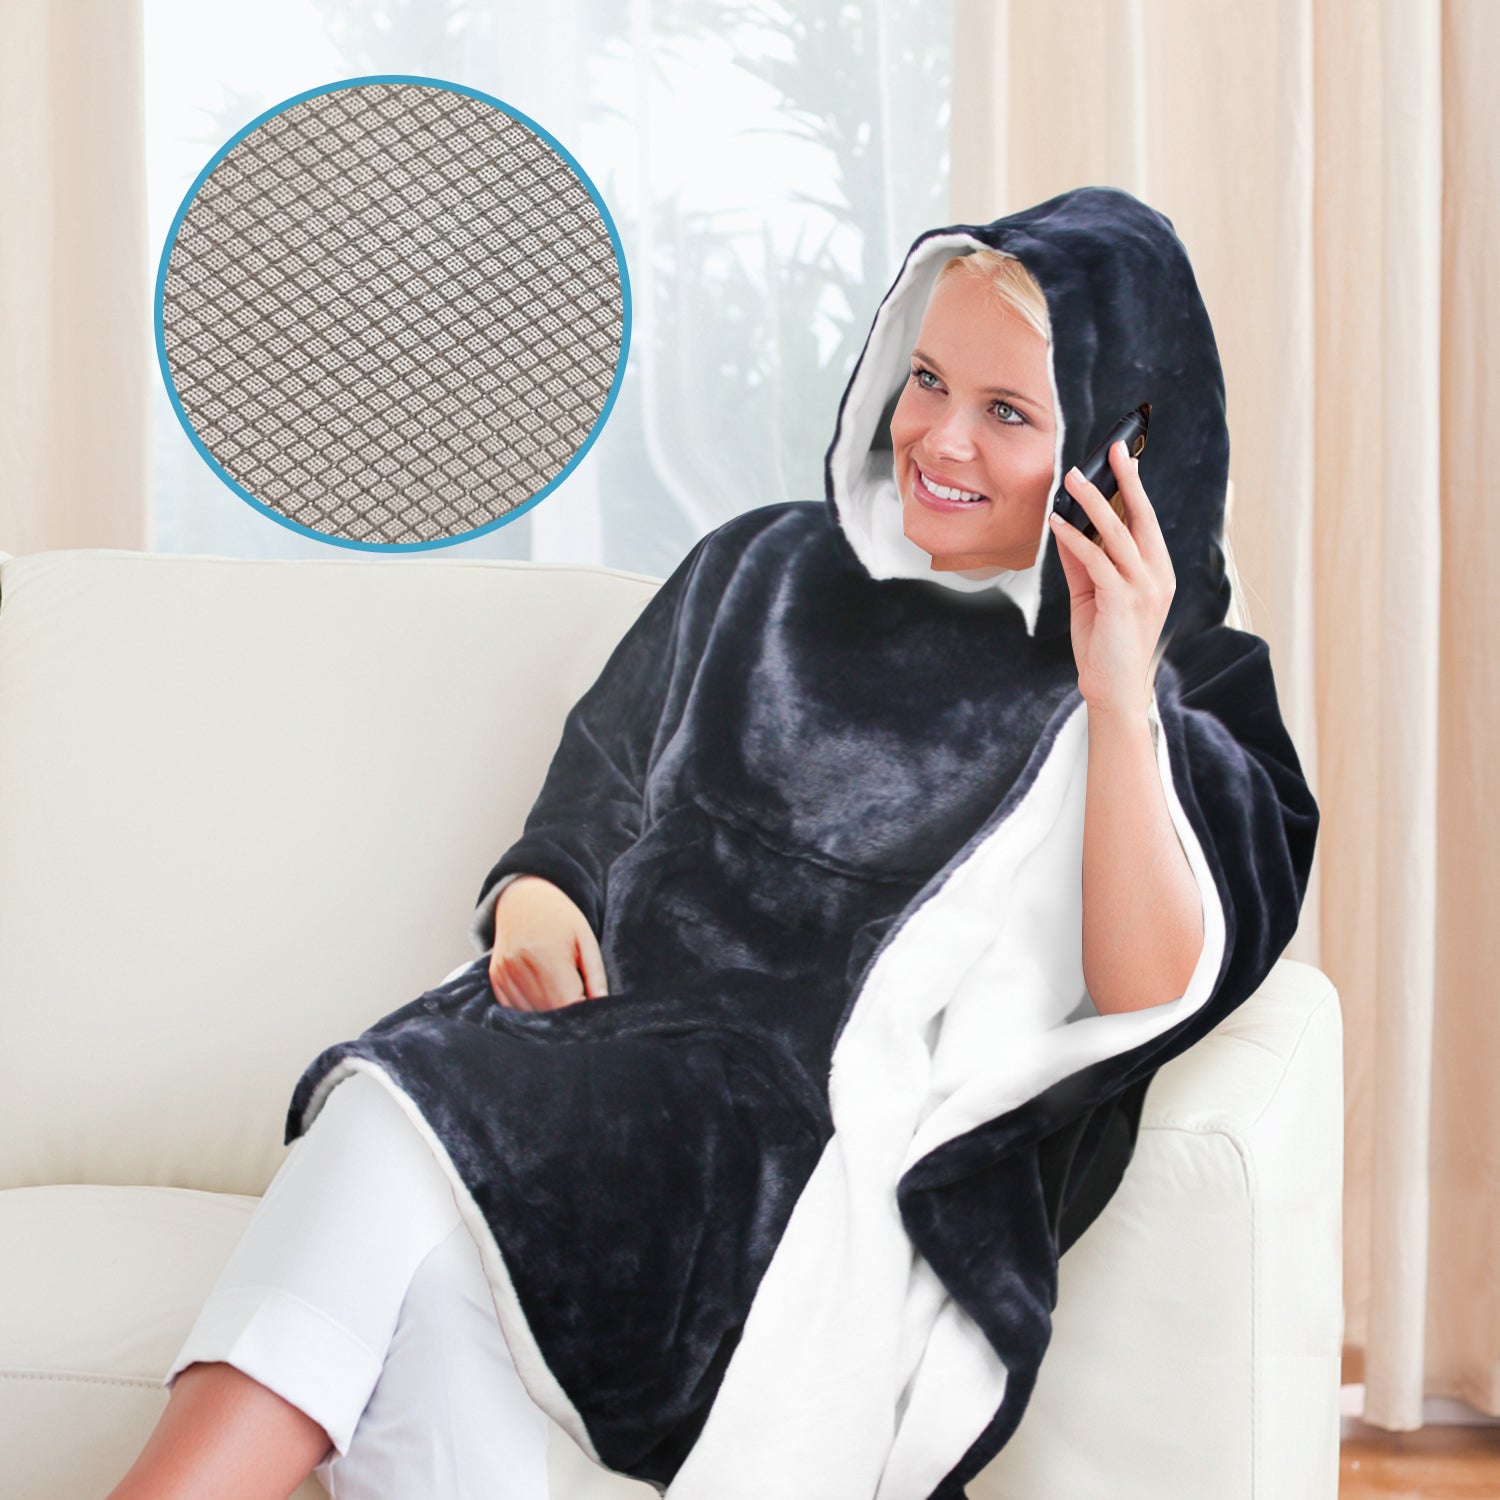 Faraday Wearable Blanket - Realyou Store